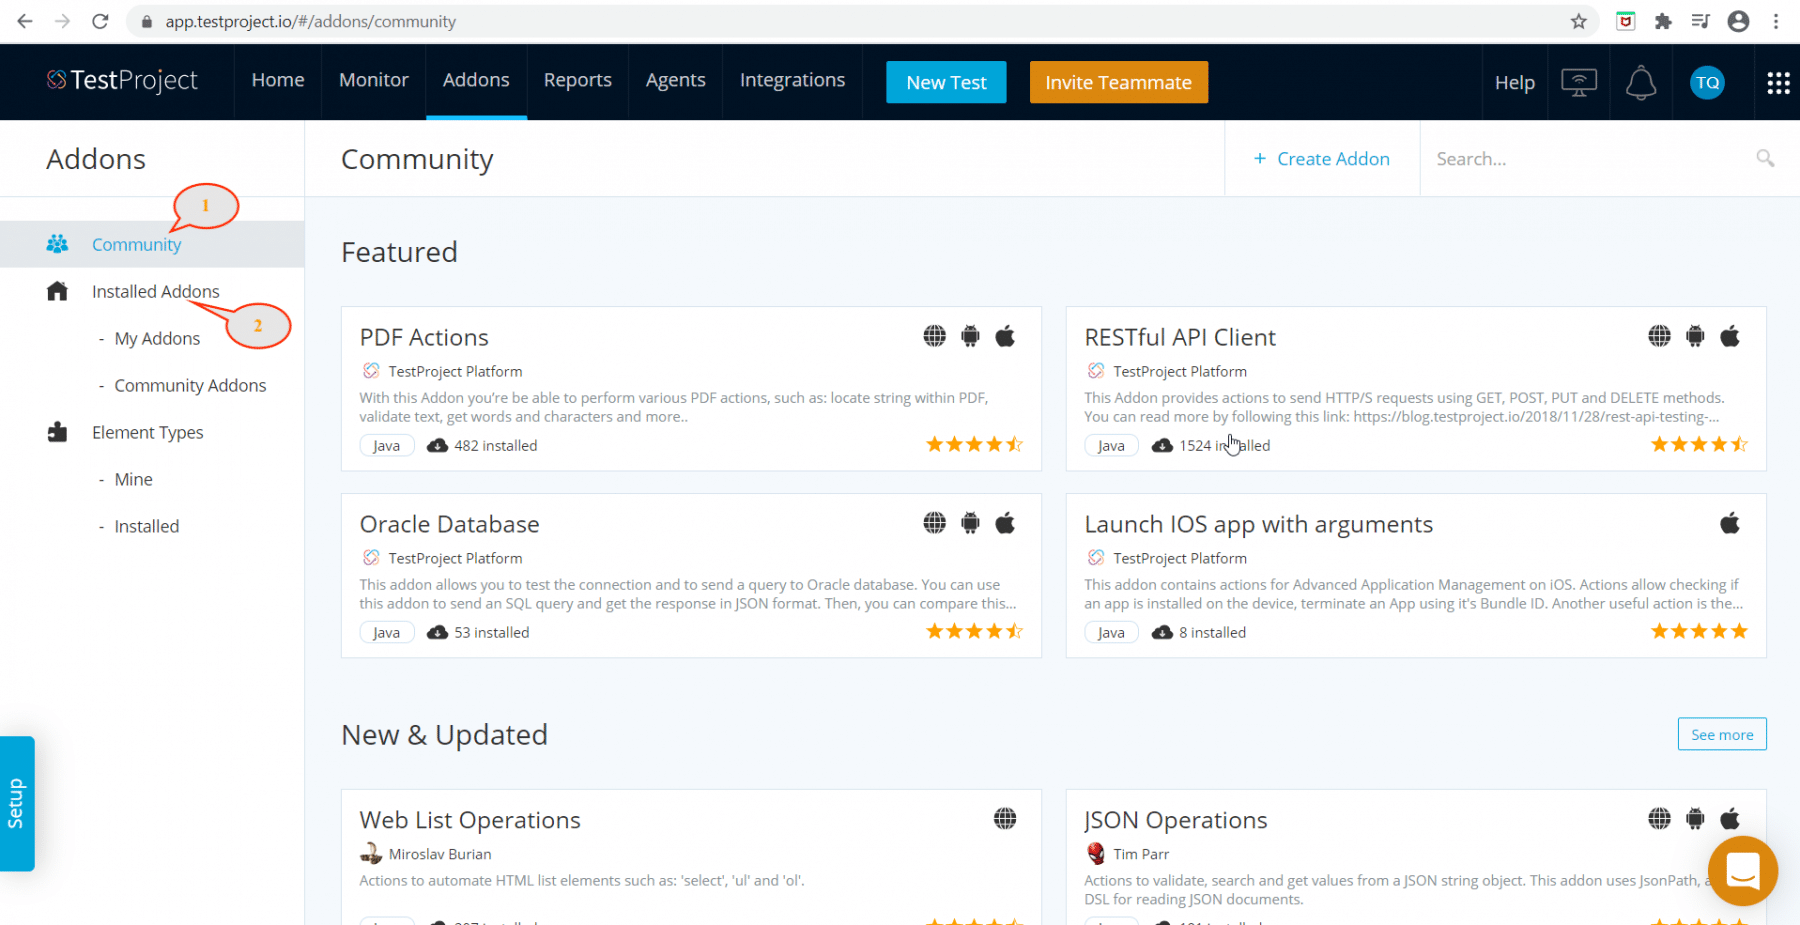 Addons section in TestProject